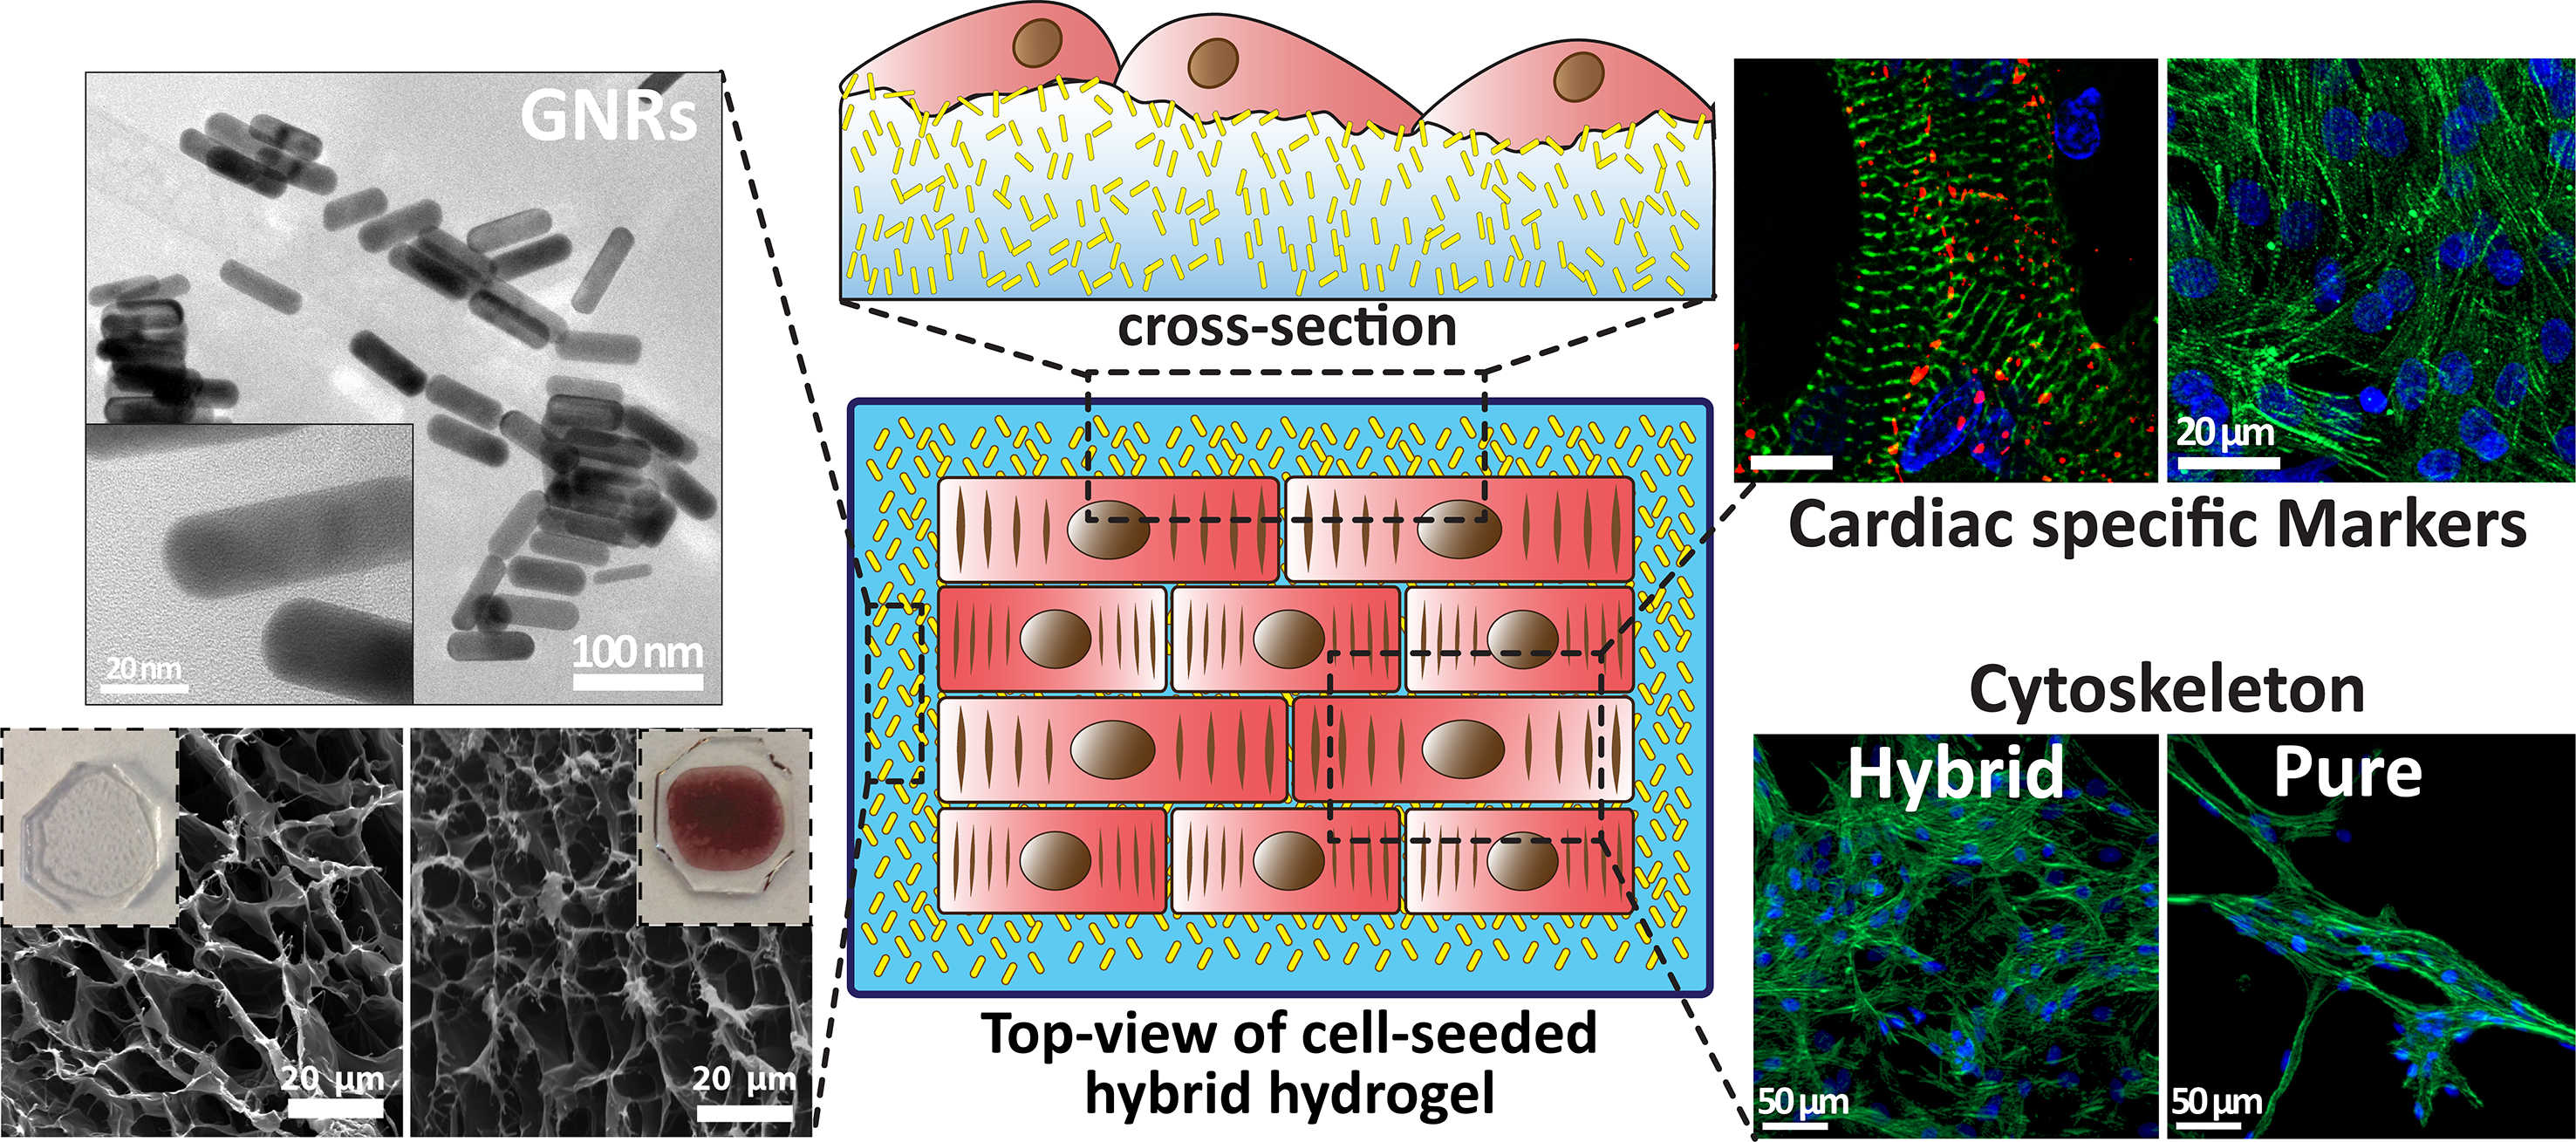 Top View of cell seeded hybrid hydrogel